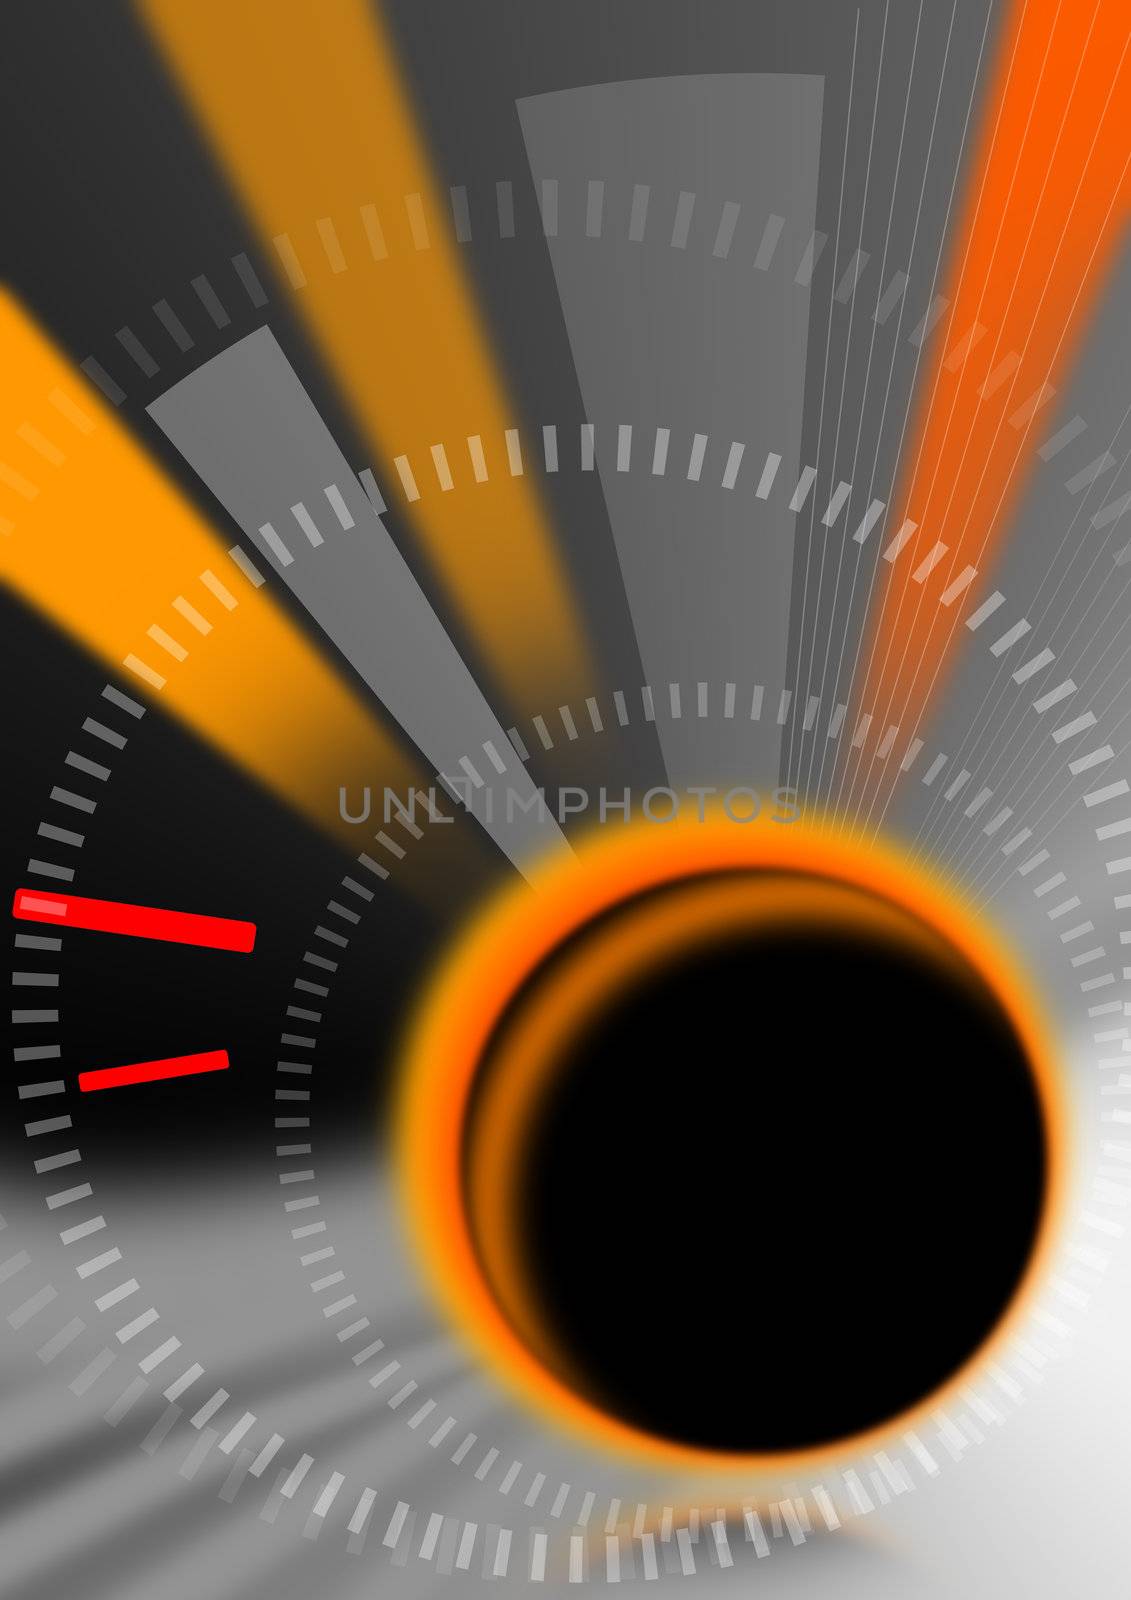 Abstract background with geometric shapes, gray, orange and stylized clock